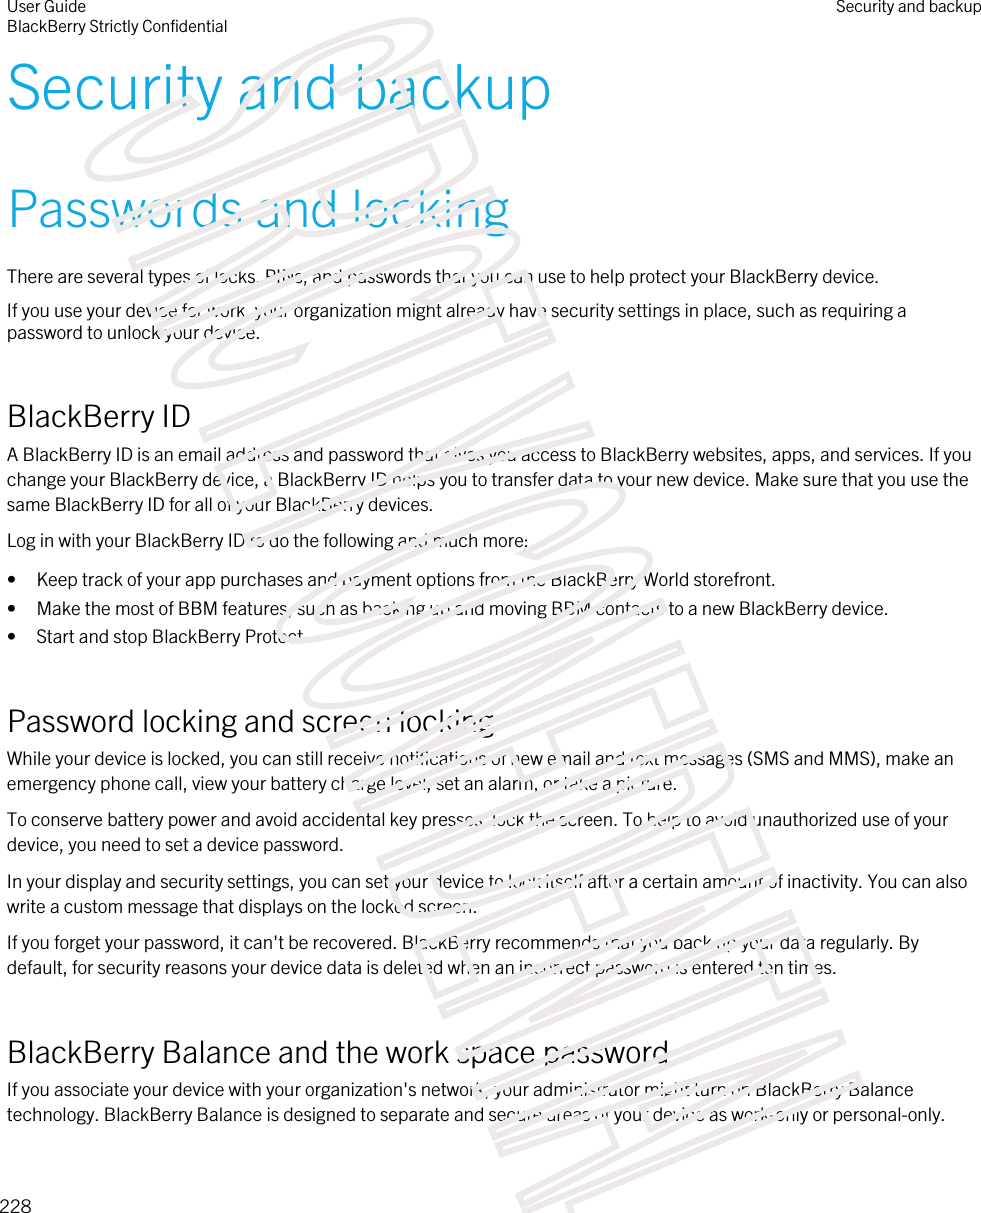 Security and backupPasswords and lockingThere are several types of locks, PINs, and passwords that you can use to help protect your BlackBerry device.If you use your device for work, your organization might already have security settings in place, such as requiring a password to unlock your device.BlackBerry IDA BlackBerry ID is an email address and password that gives you access to BlackBerry websites, apps, and services. If you change your BlackBerry device, a BlackBerry ID helps you to transfer data to your new device. Make sure that you use the same BlackBerry ID for all of your BlackBerry devices.Log in with your BlackBerry ID to do the following and much more:• Keep track of your app purchases and payment options from the BlackBerry World storefront.• Make the most of BBM features, such as backing up and moving BBM contacts to a new BlackBerry device.• Start and stop BlackBerry Protect.Password locking and screen lockingWhile your device is locked, you can still receive notifications of new email and text messages (SMS and MMS), make an emergency phone call, view your battery charge level, set an alarm, or take a picture.To conserve battery power and avoid accidental key presses, lock the screen. To help to avoid unauthorized use of your device, you need to set a device password.In your display and security settings, you can set your device to lock itself after a certain amount of inactivity. You can also write a custom message that displays on the locked screen.If you forget your password, it can&apos;t be recovered. BlackBerry recommends that you back up your data regularly. By default, for security reasons your device data is deleted when an incorrect password is entered ten times.BlackBerry Balance and the work space passwordIf you associate your device with your organization&apos;s network, your administrator might turn on BlackBerry Balance technology. BlackBerry Balance is designed to separate and secure areas of your device as work-only or personal-only.User GuideBlackBerry Strictly ConfidentialSecurity and backup228STRICTLY CONFIDENTIAL